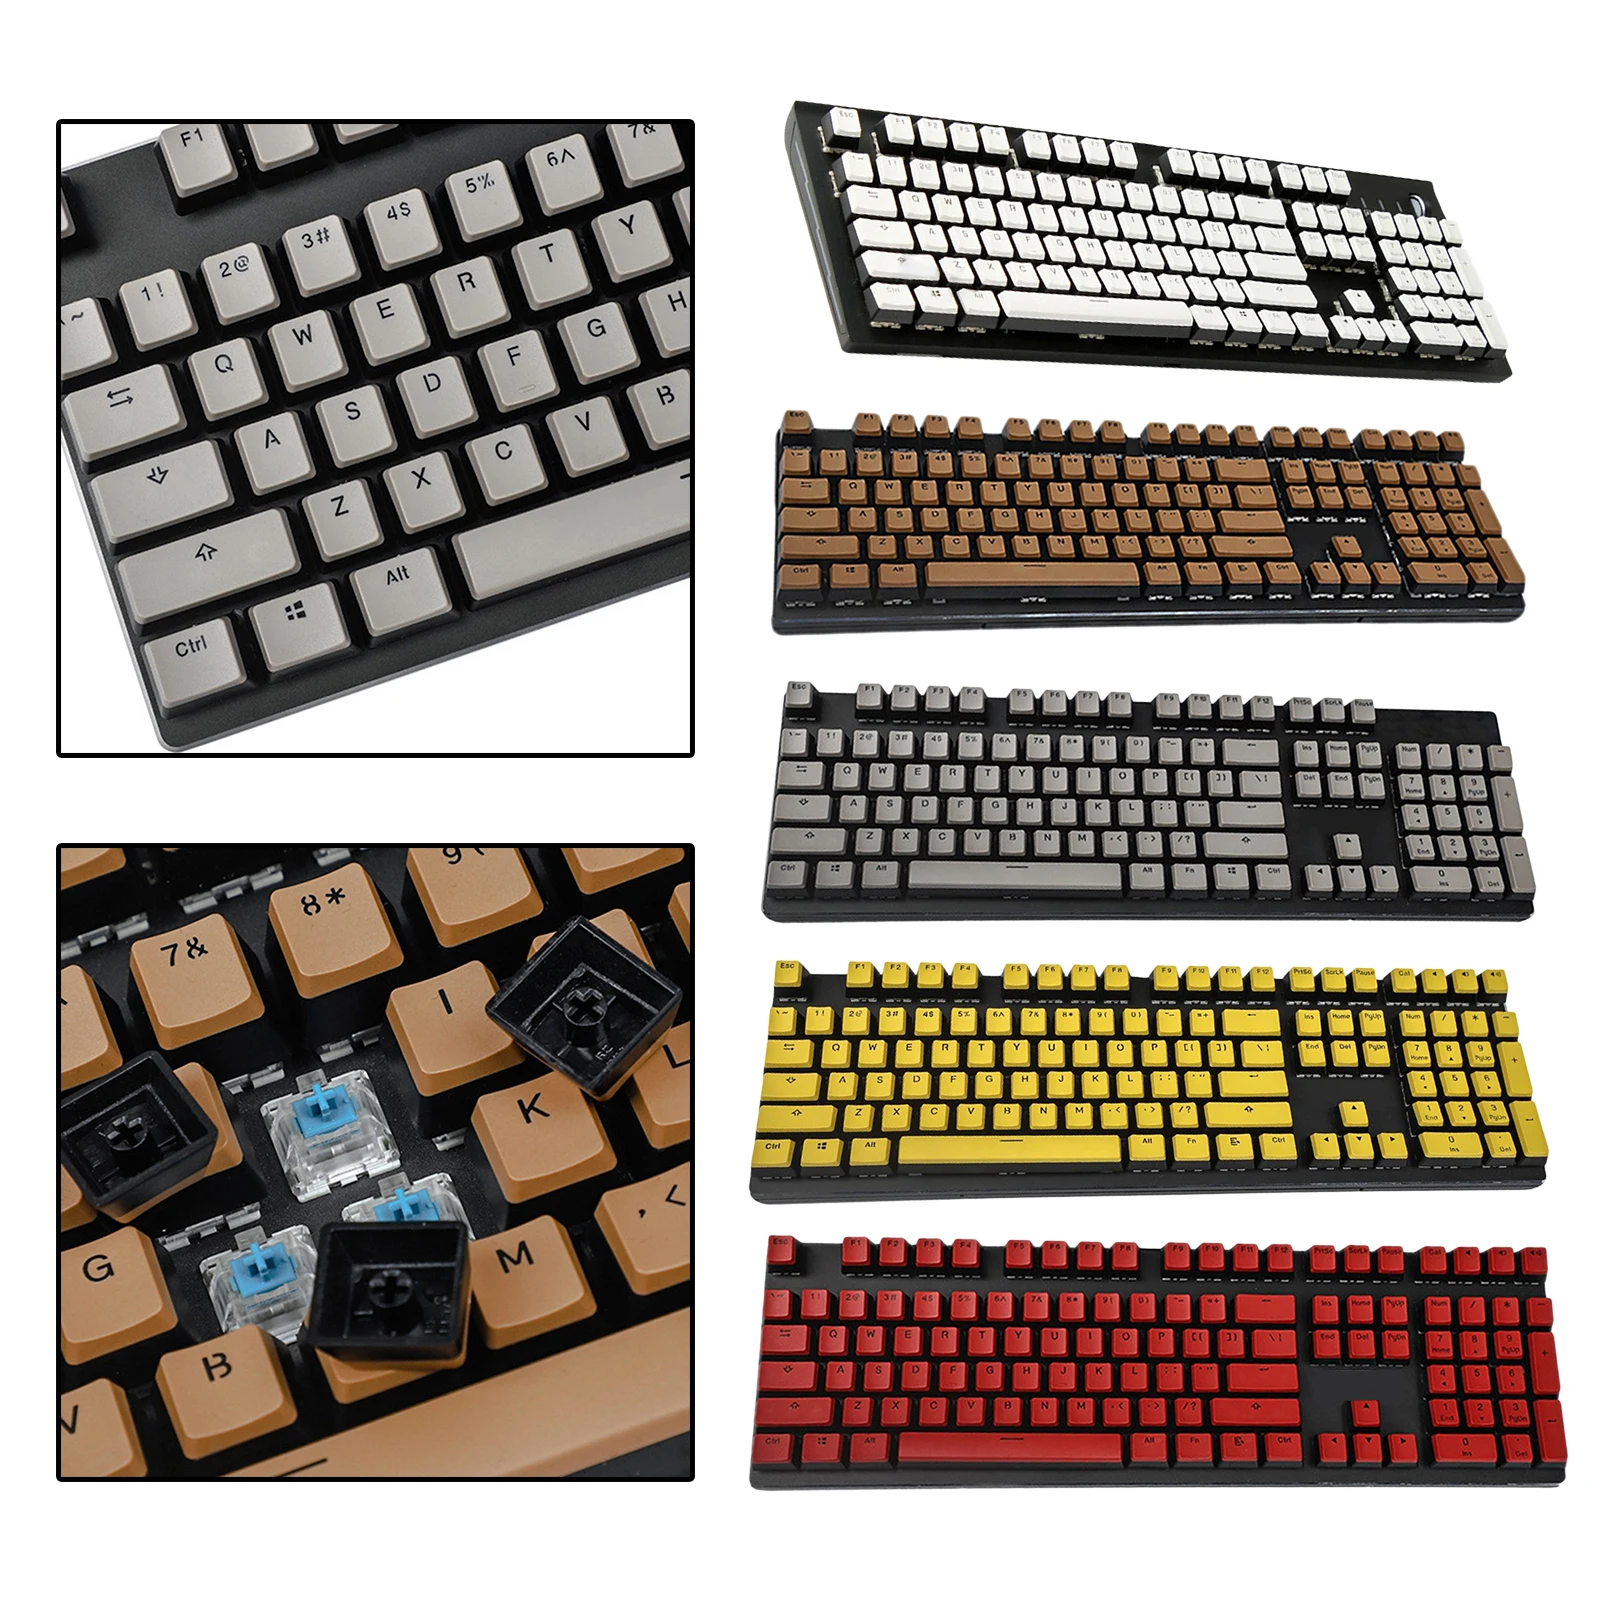 Pudding Keycap Game Key Caps Replacement for Cherry MX Mechanical Keyboard